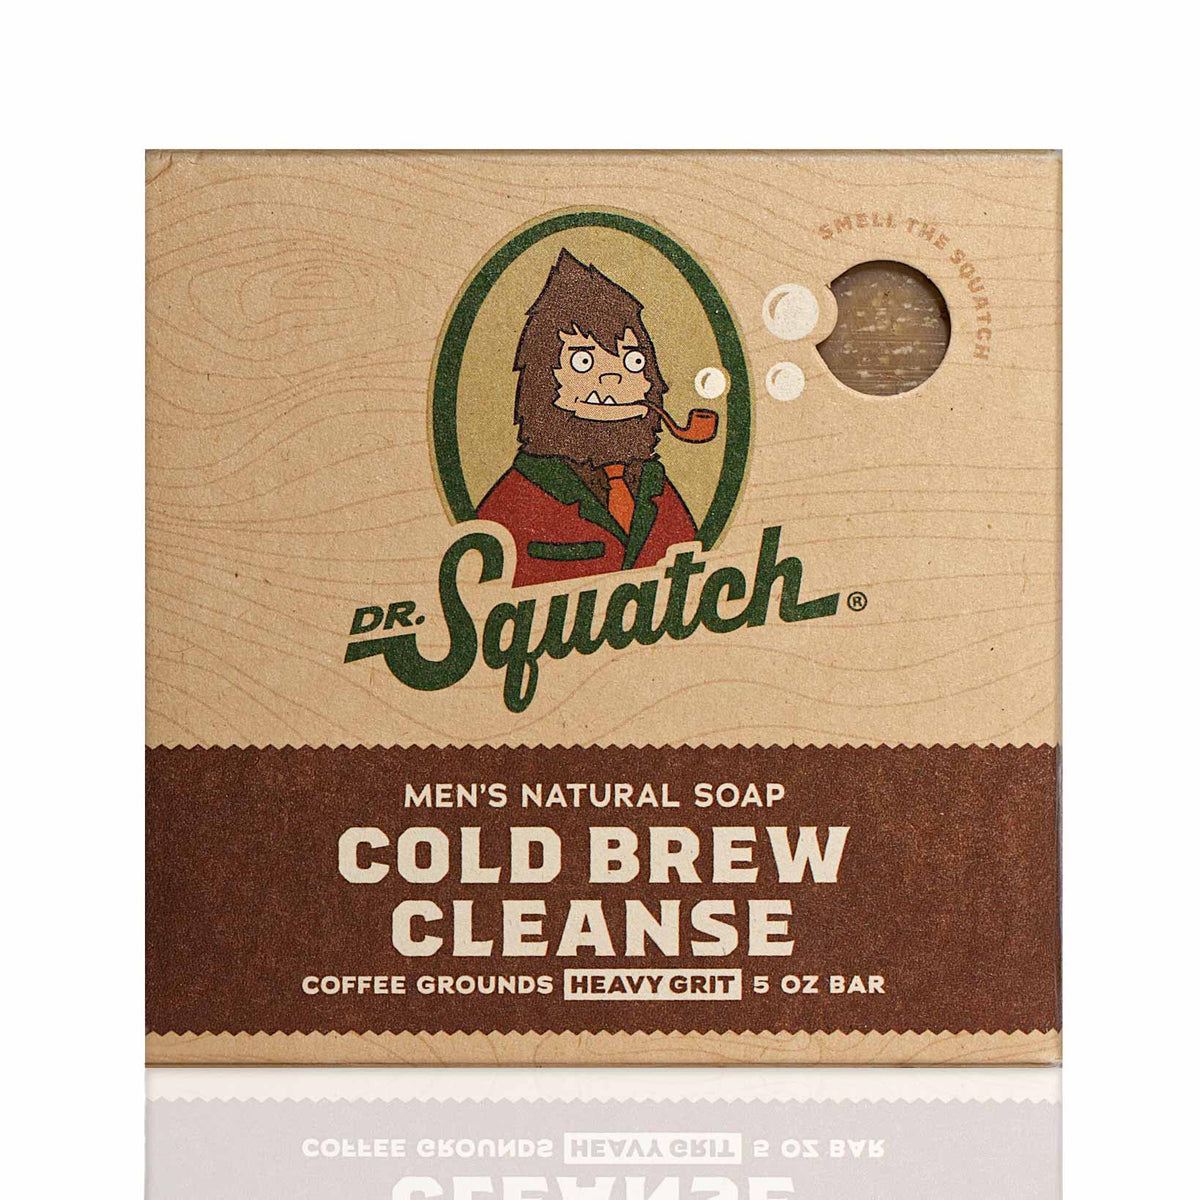 Dr. Squatch - Natural Bar Soap - Frosty Peppermint - Limited Scent